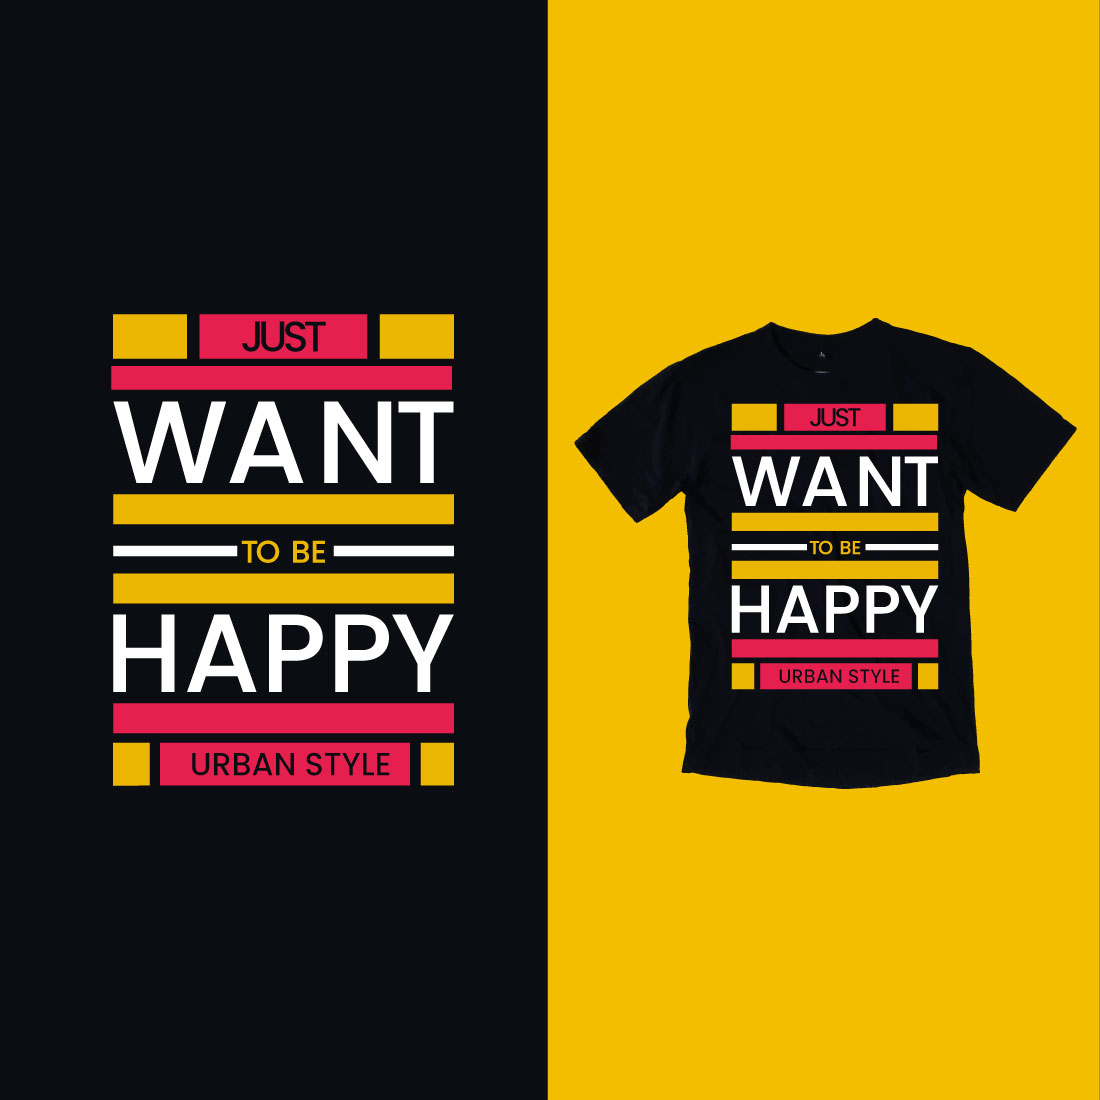 T - shirt that says just want to be happy.